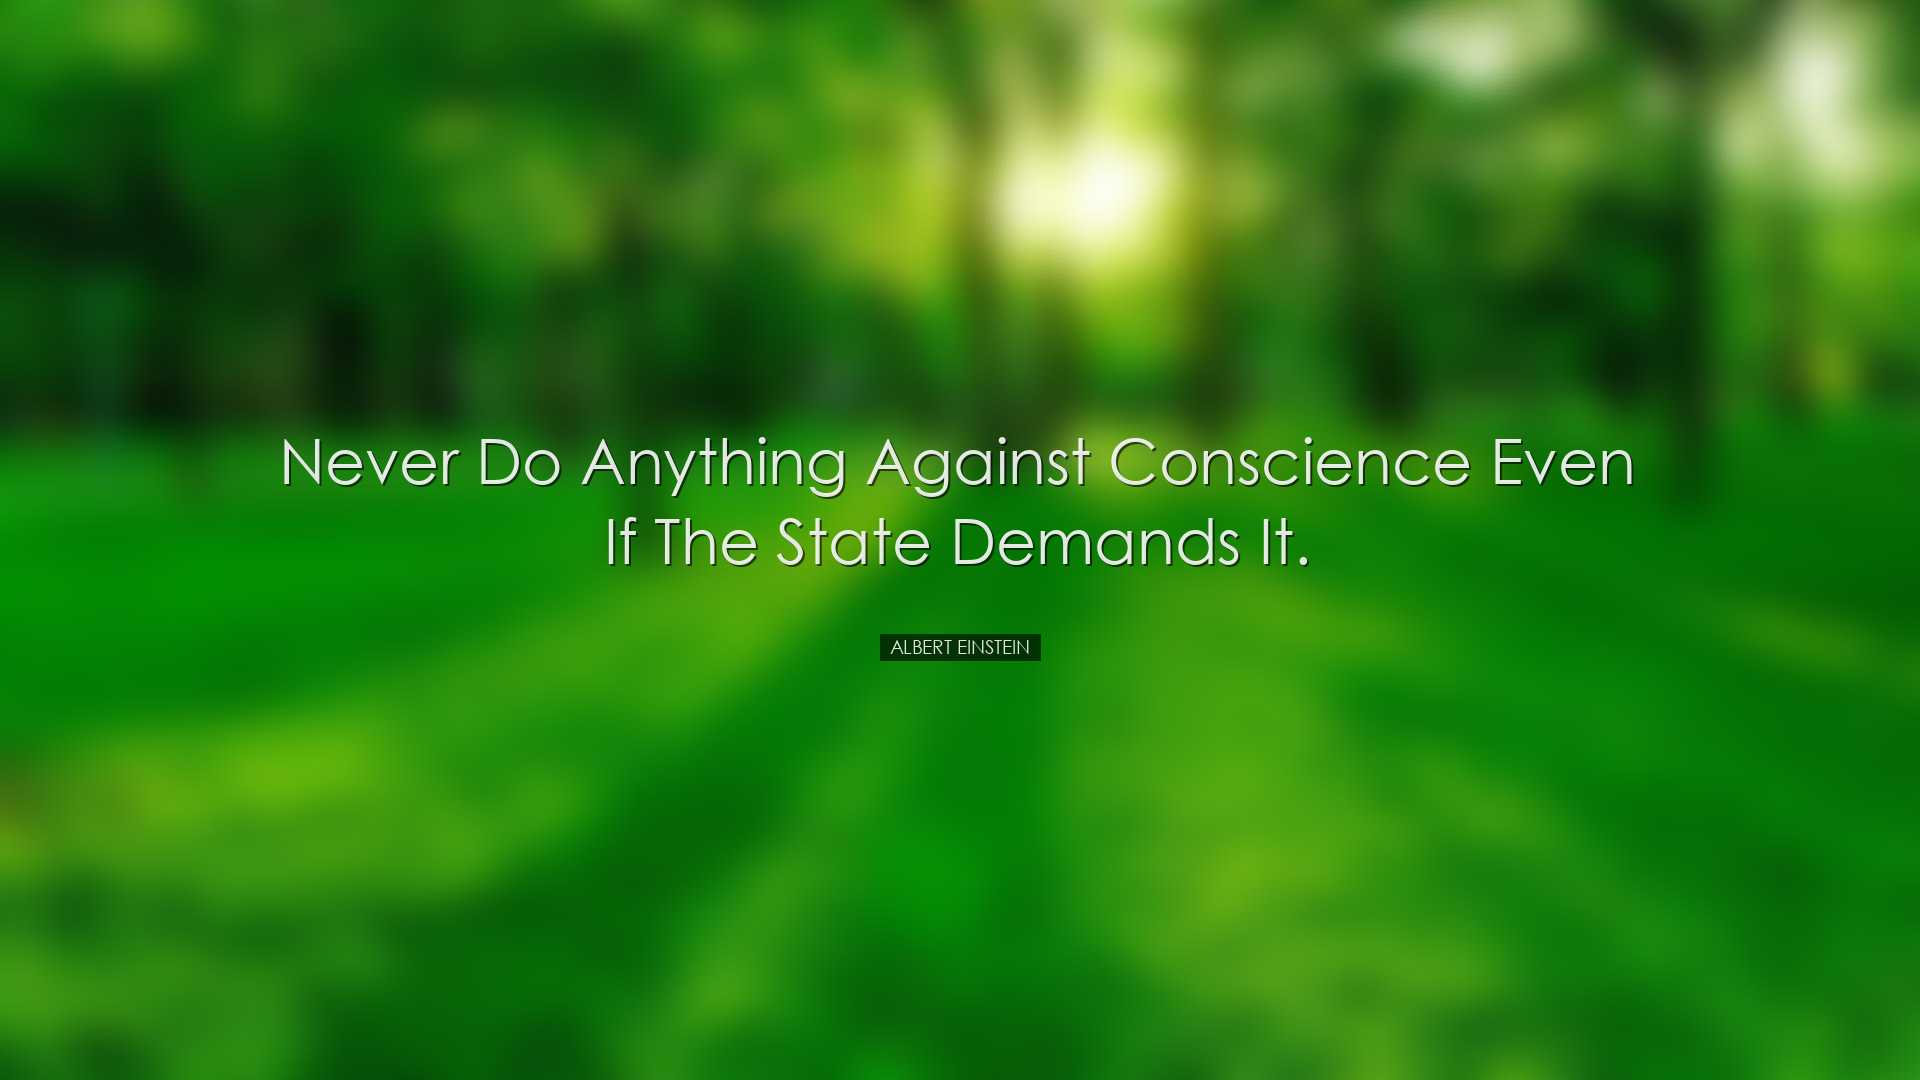 Never do anything against conscience even if the state demands it.